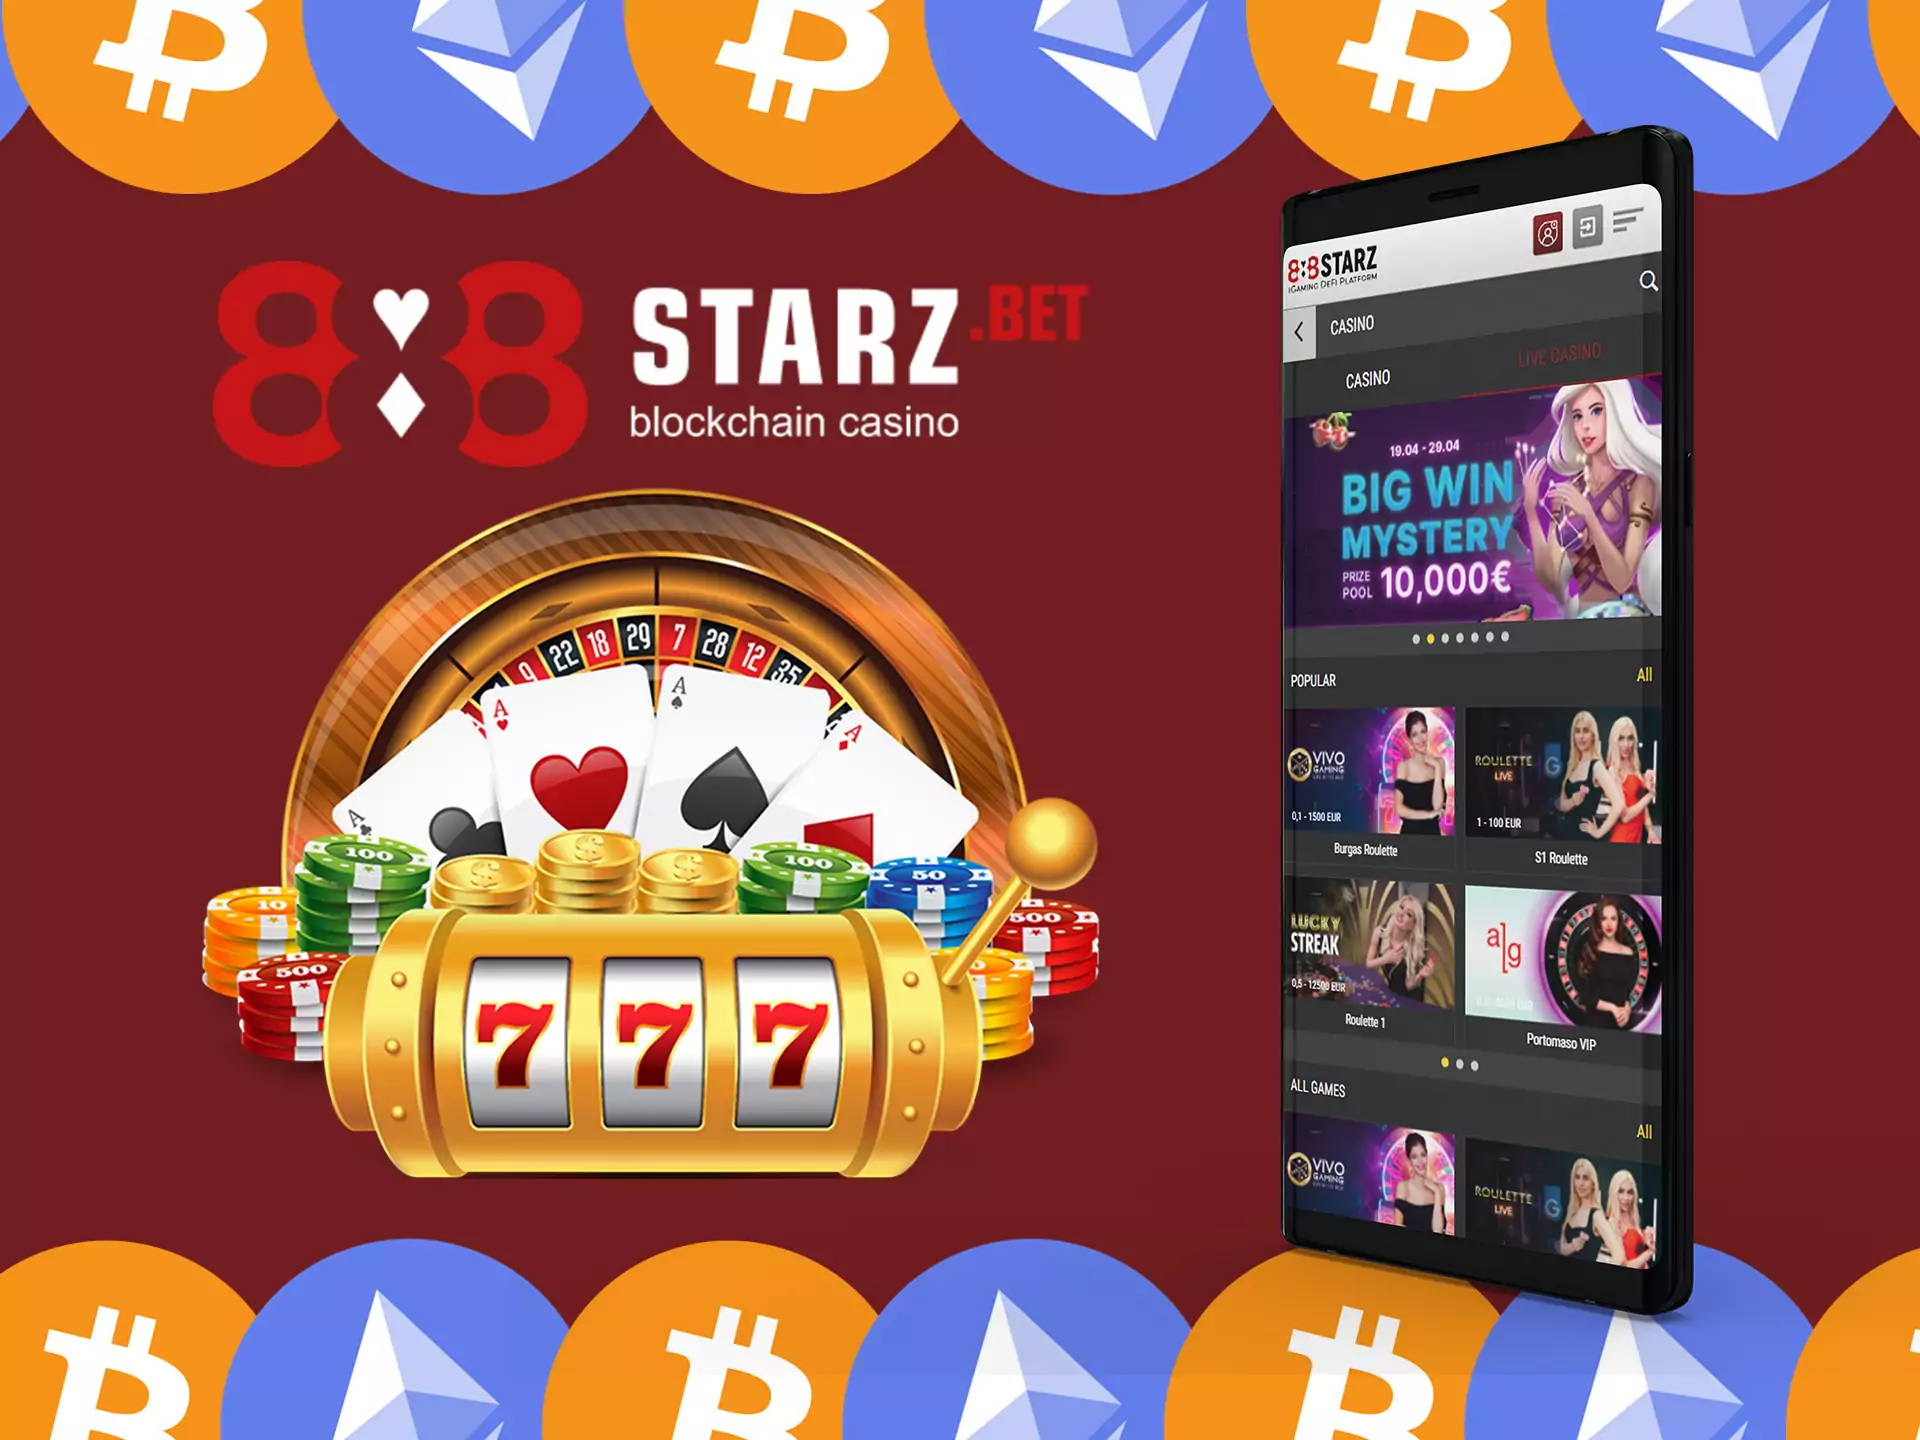 Play casino at 888starz and win big prizes.